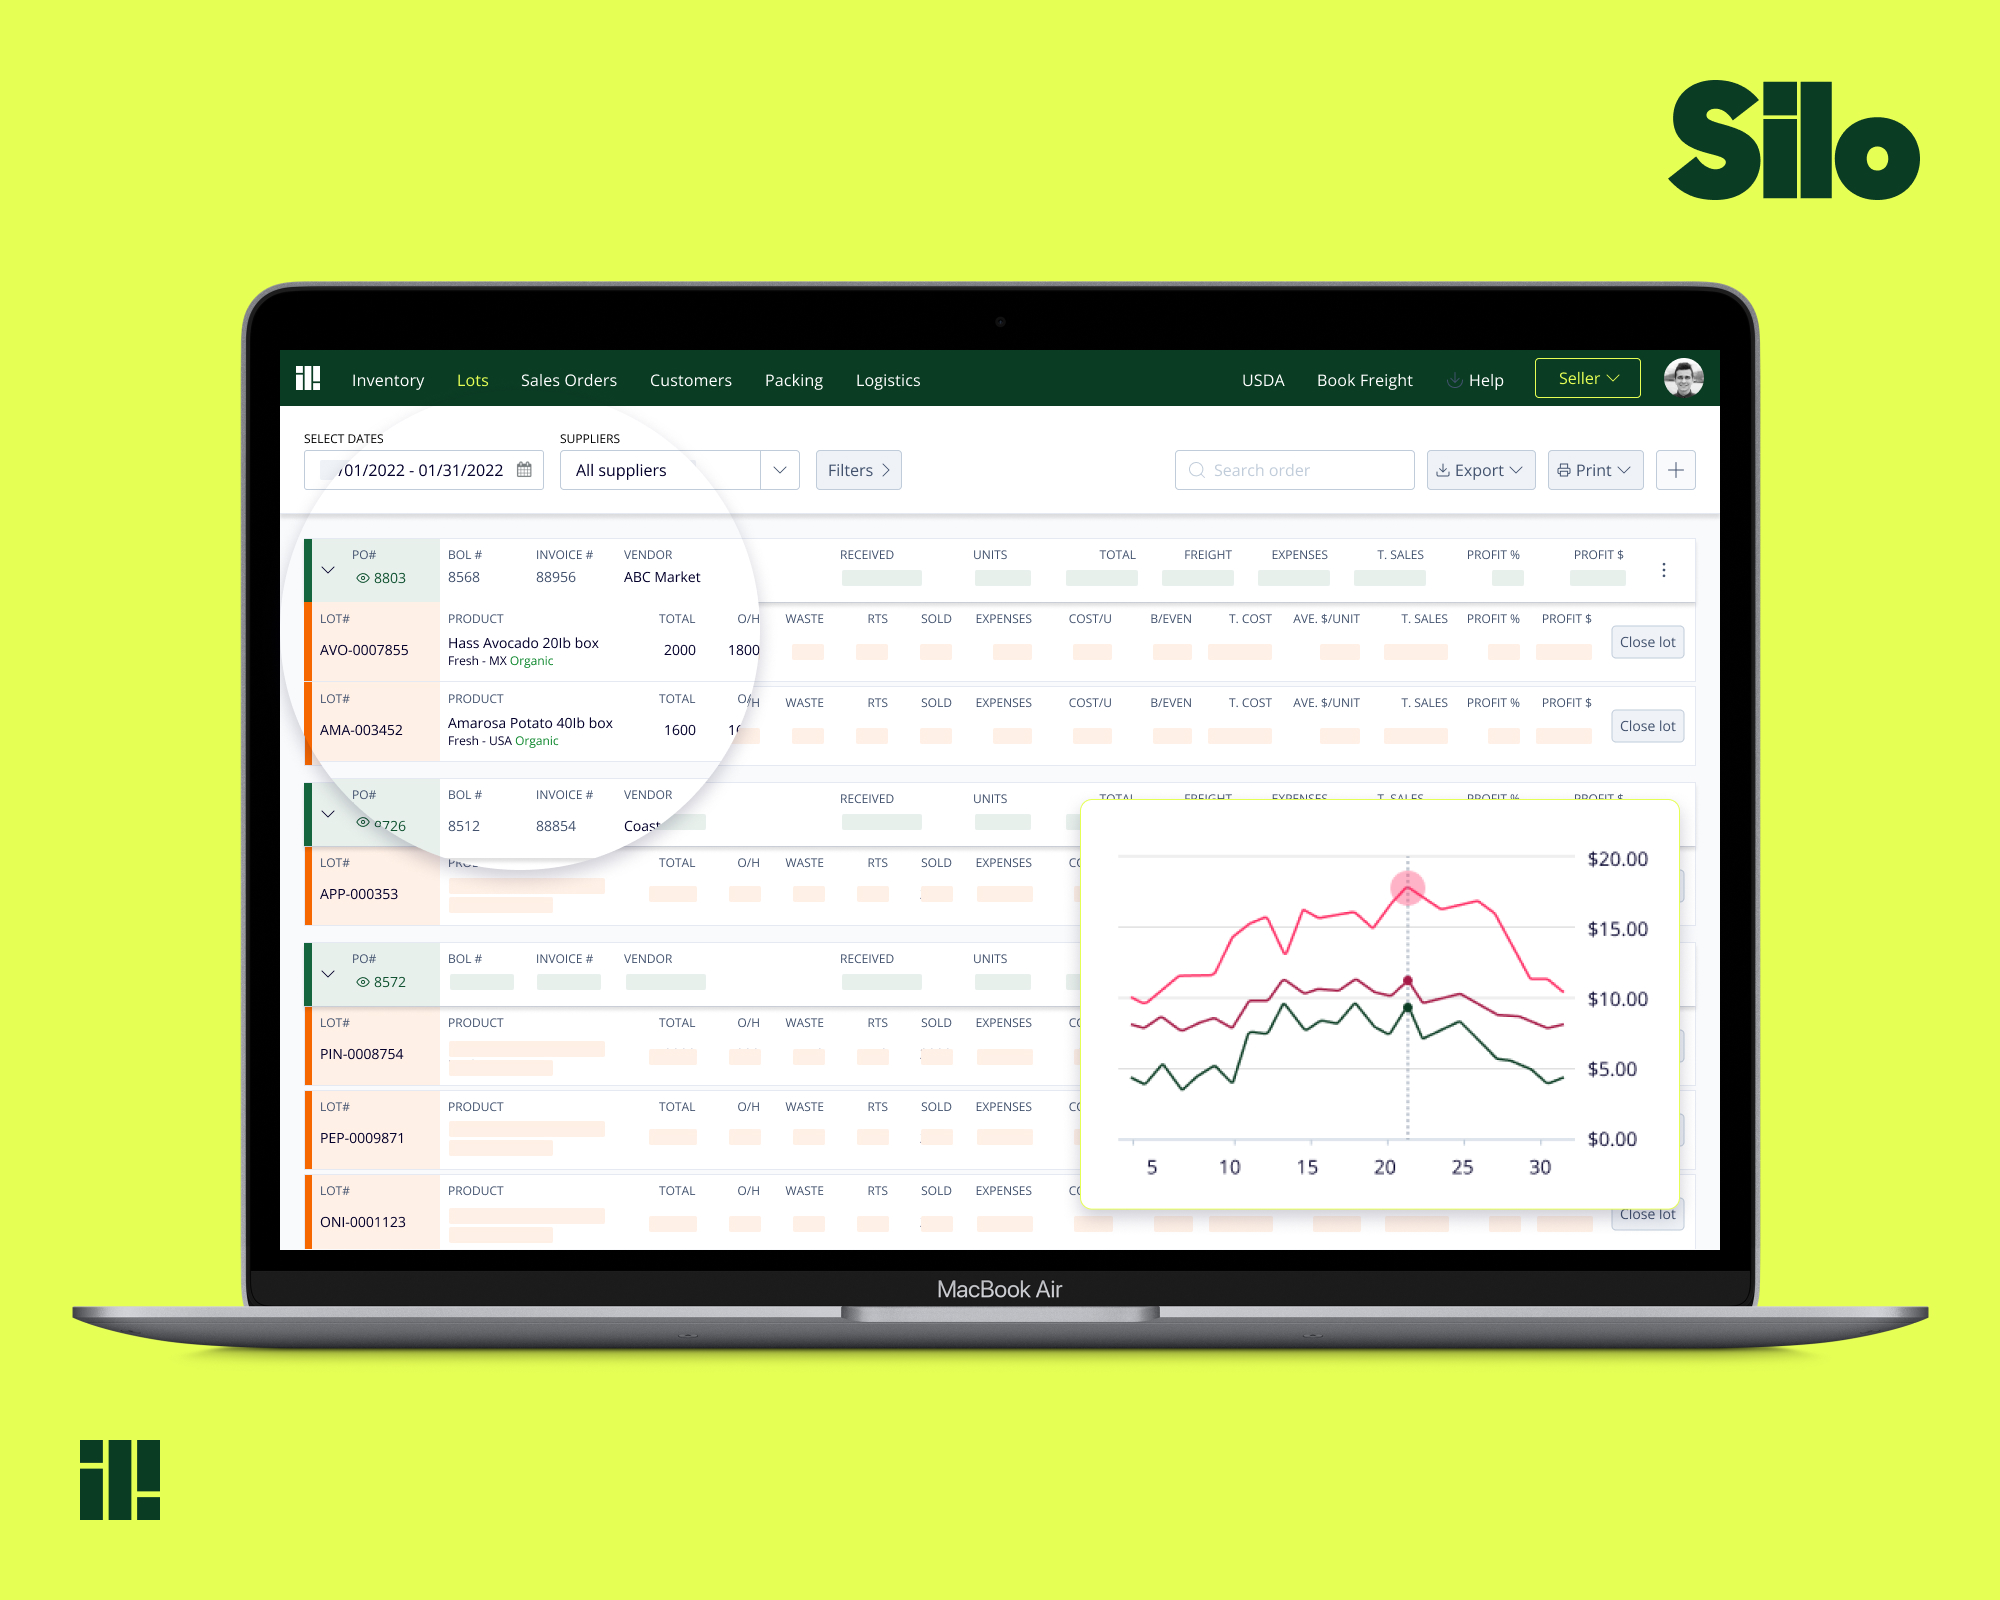 Silo offers full visibility into your produce business finances, down to the cost of a single lot.